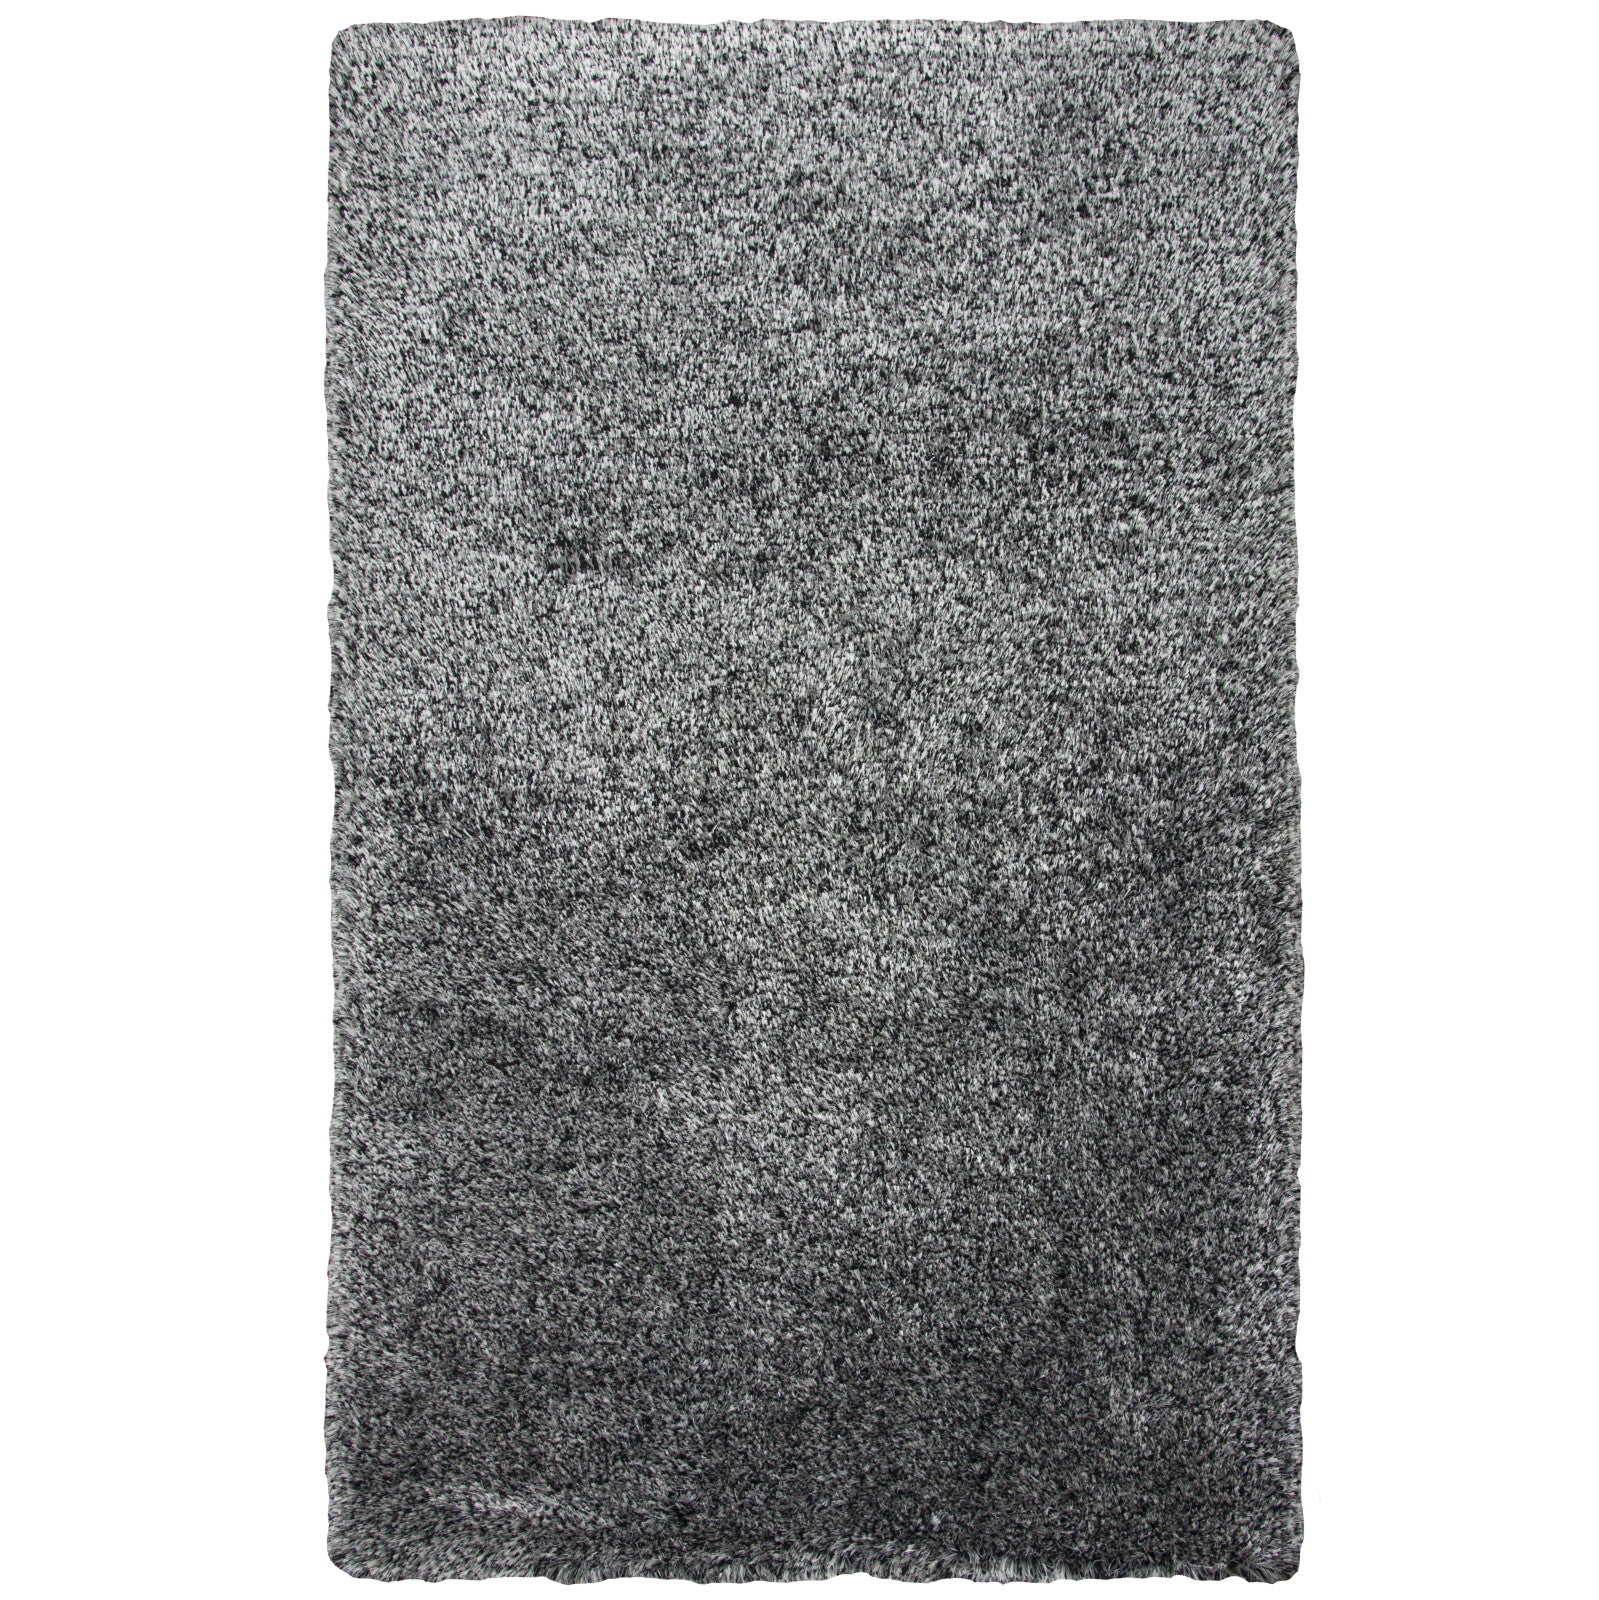 Rizzy Commons CO293A Black Area Rug